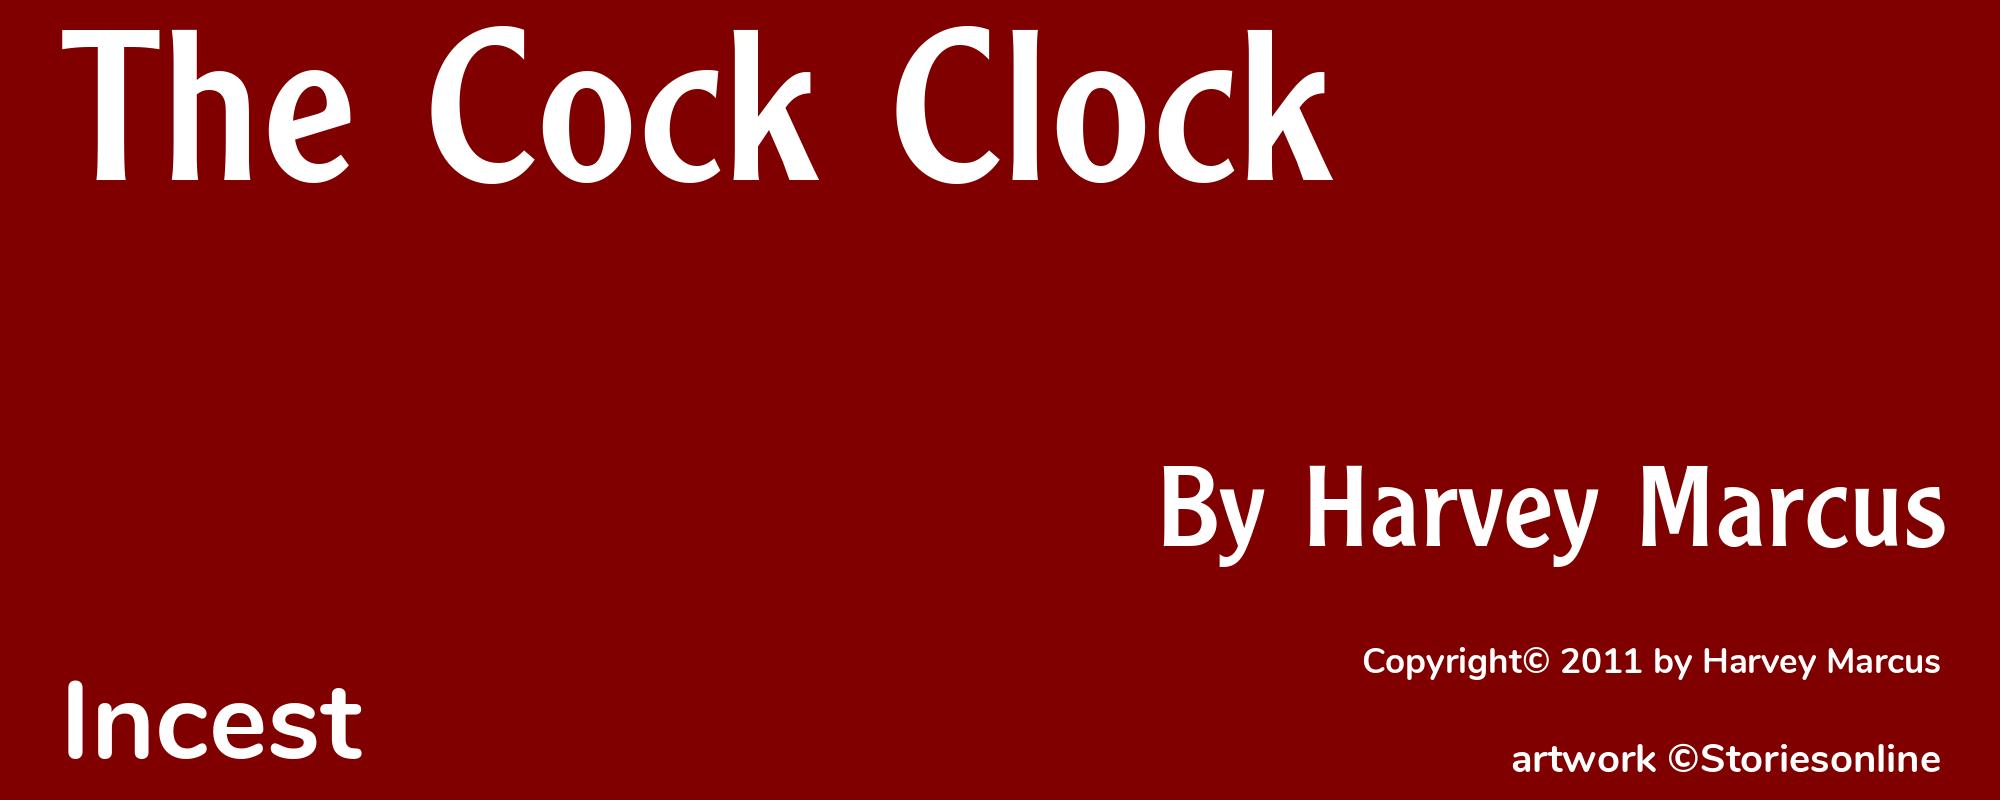 The Cock Clock - Cover